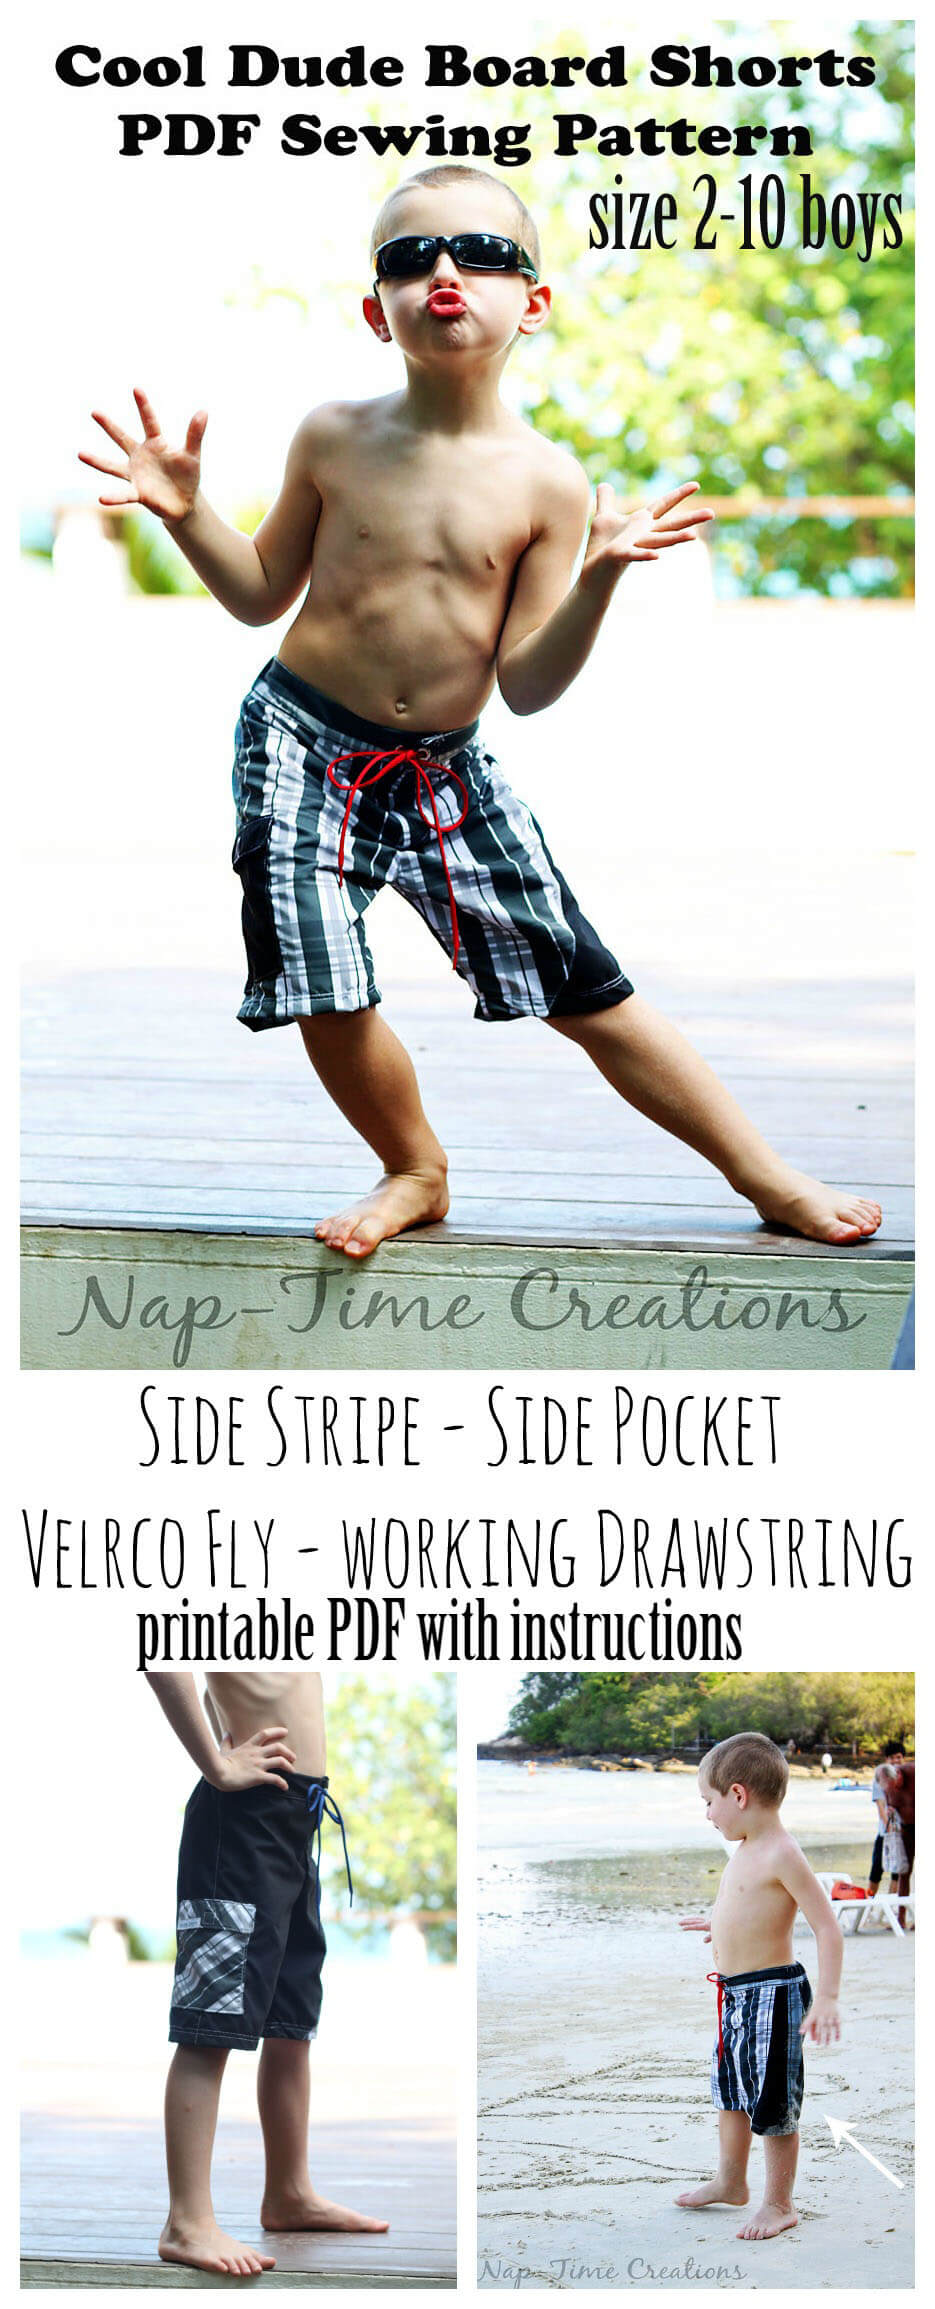 Cool Dude Board Shorts Sewing Pattern